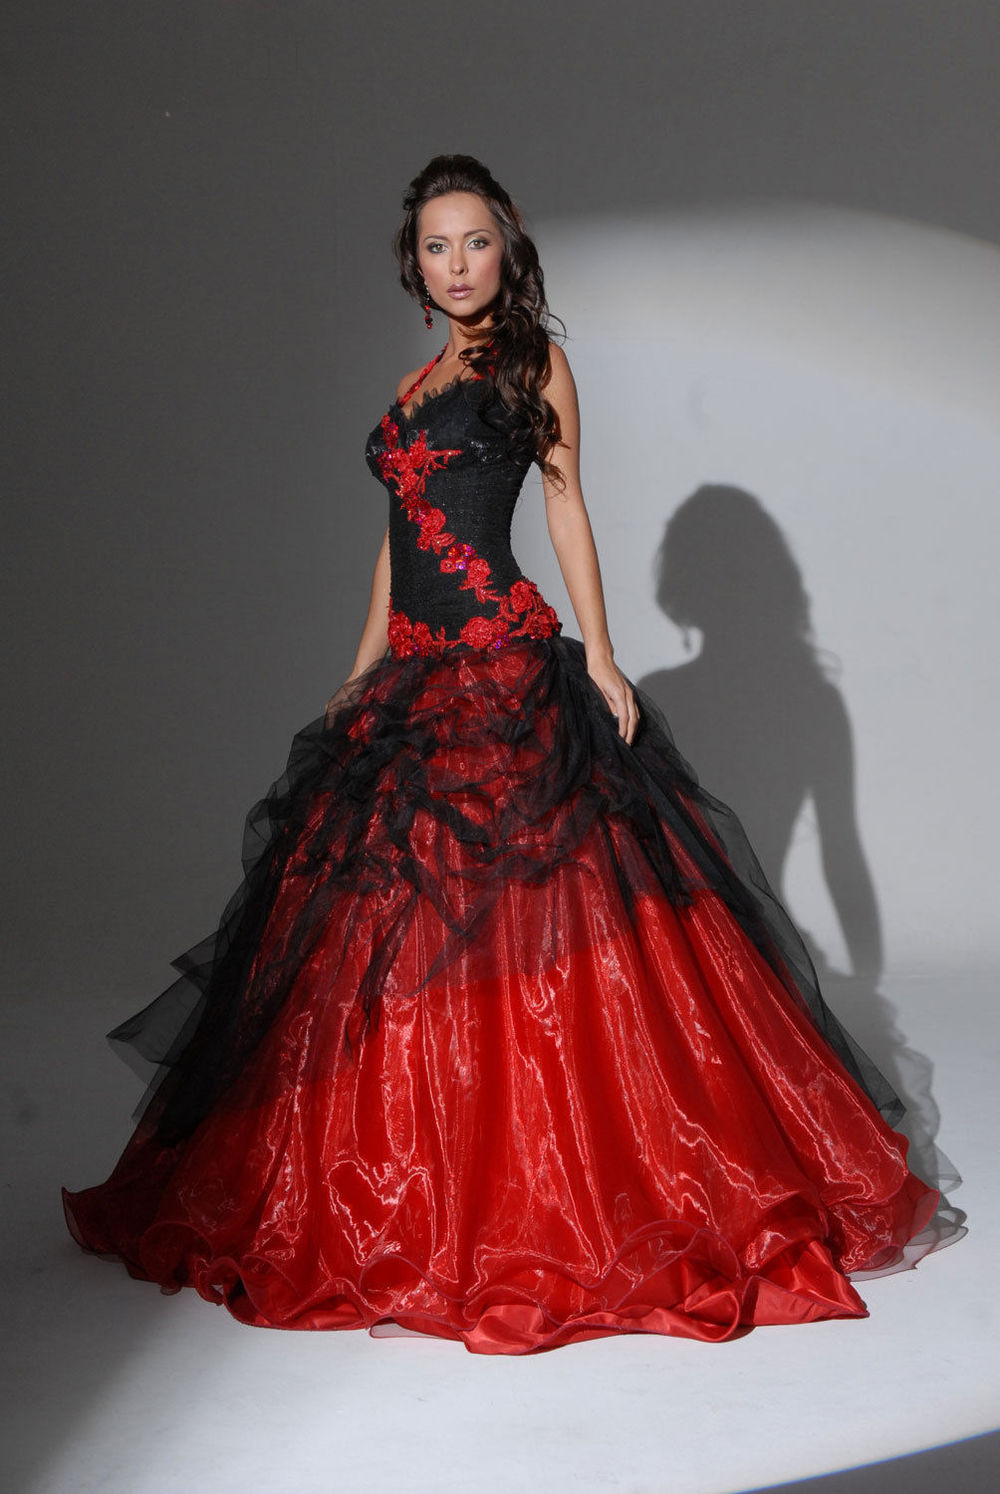 Red Wedding Gown
 Why You Can Totally Rock Red on Your Big Day